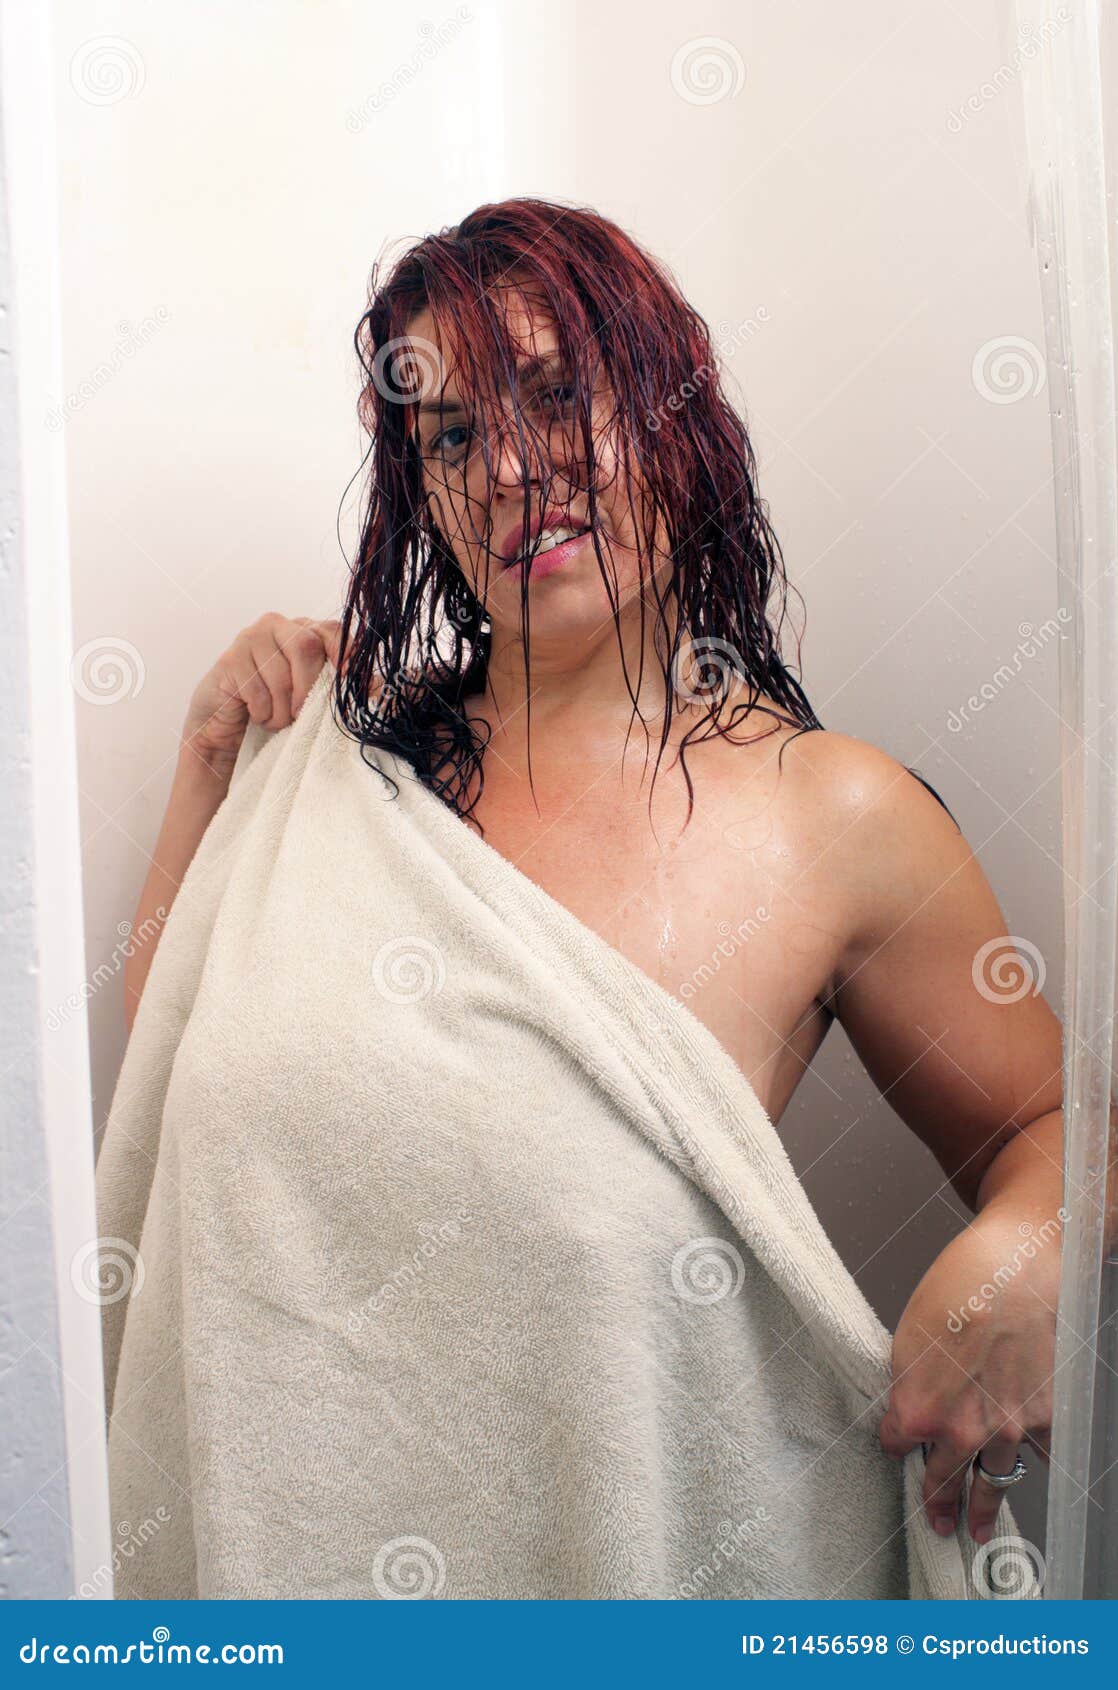 Redhead In The Shower 1 Stock Photo Image Of Solit